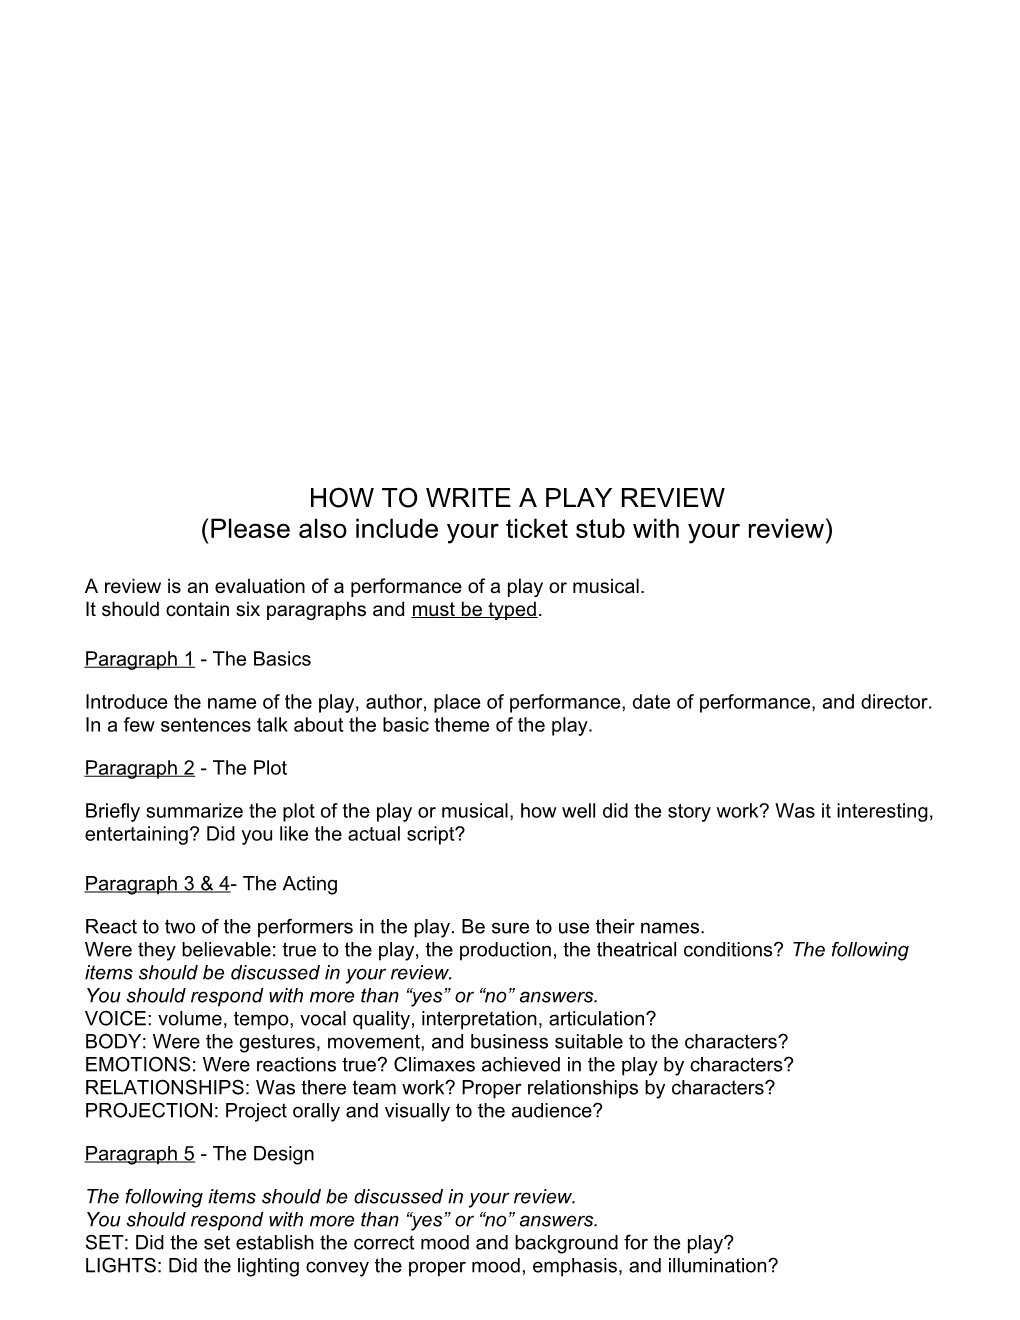 How to Write a Play Review